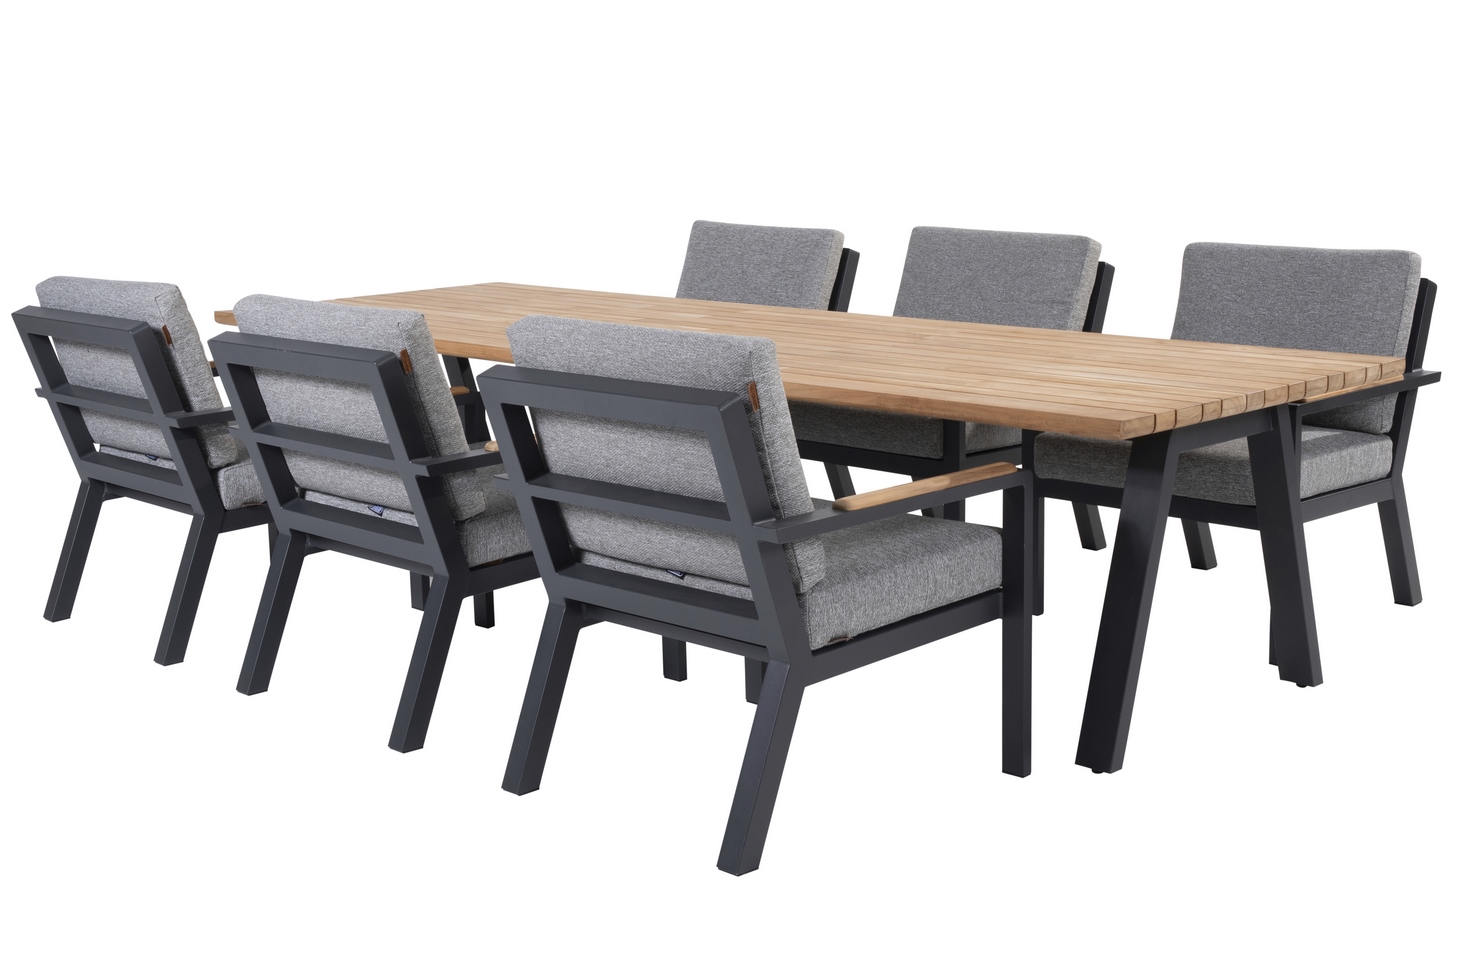 19865-91447-91448__Proton_low_dining_set_with_Ambassador_low_dining_table_04.jpg